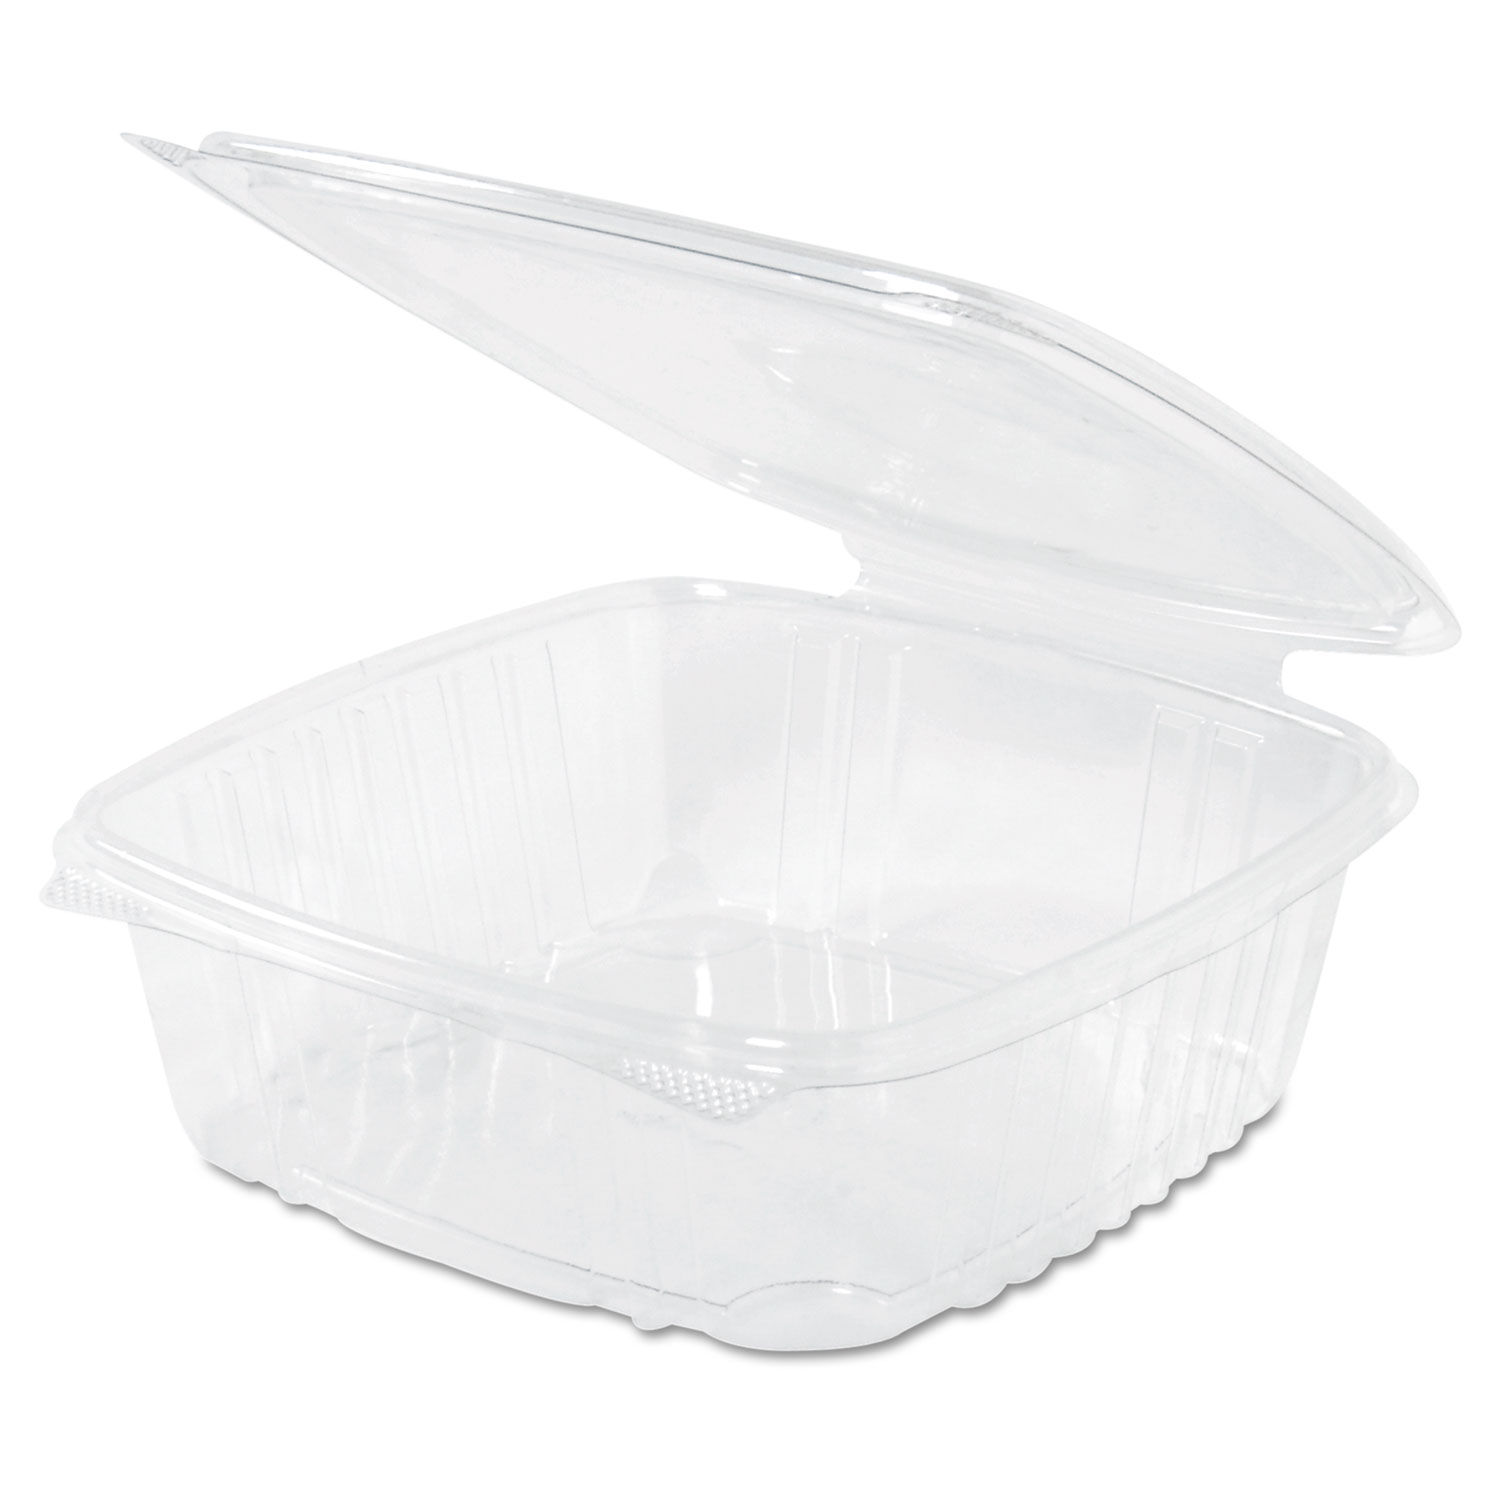 16oz Gen-Pak AD16-- 5 3/8 X 4 1/2 X 2 5/8, Clear Hinged Deli Container 